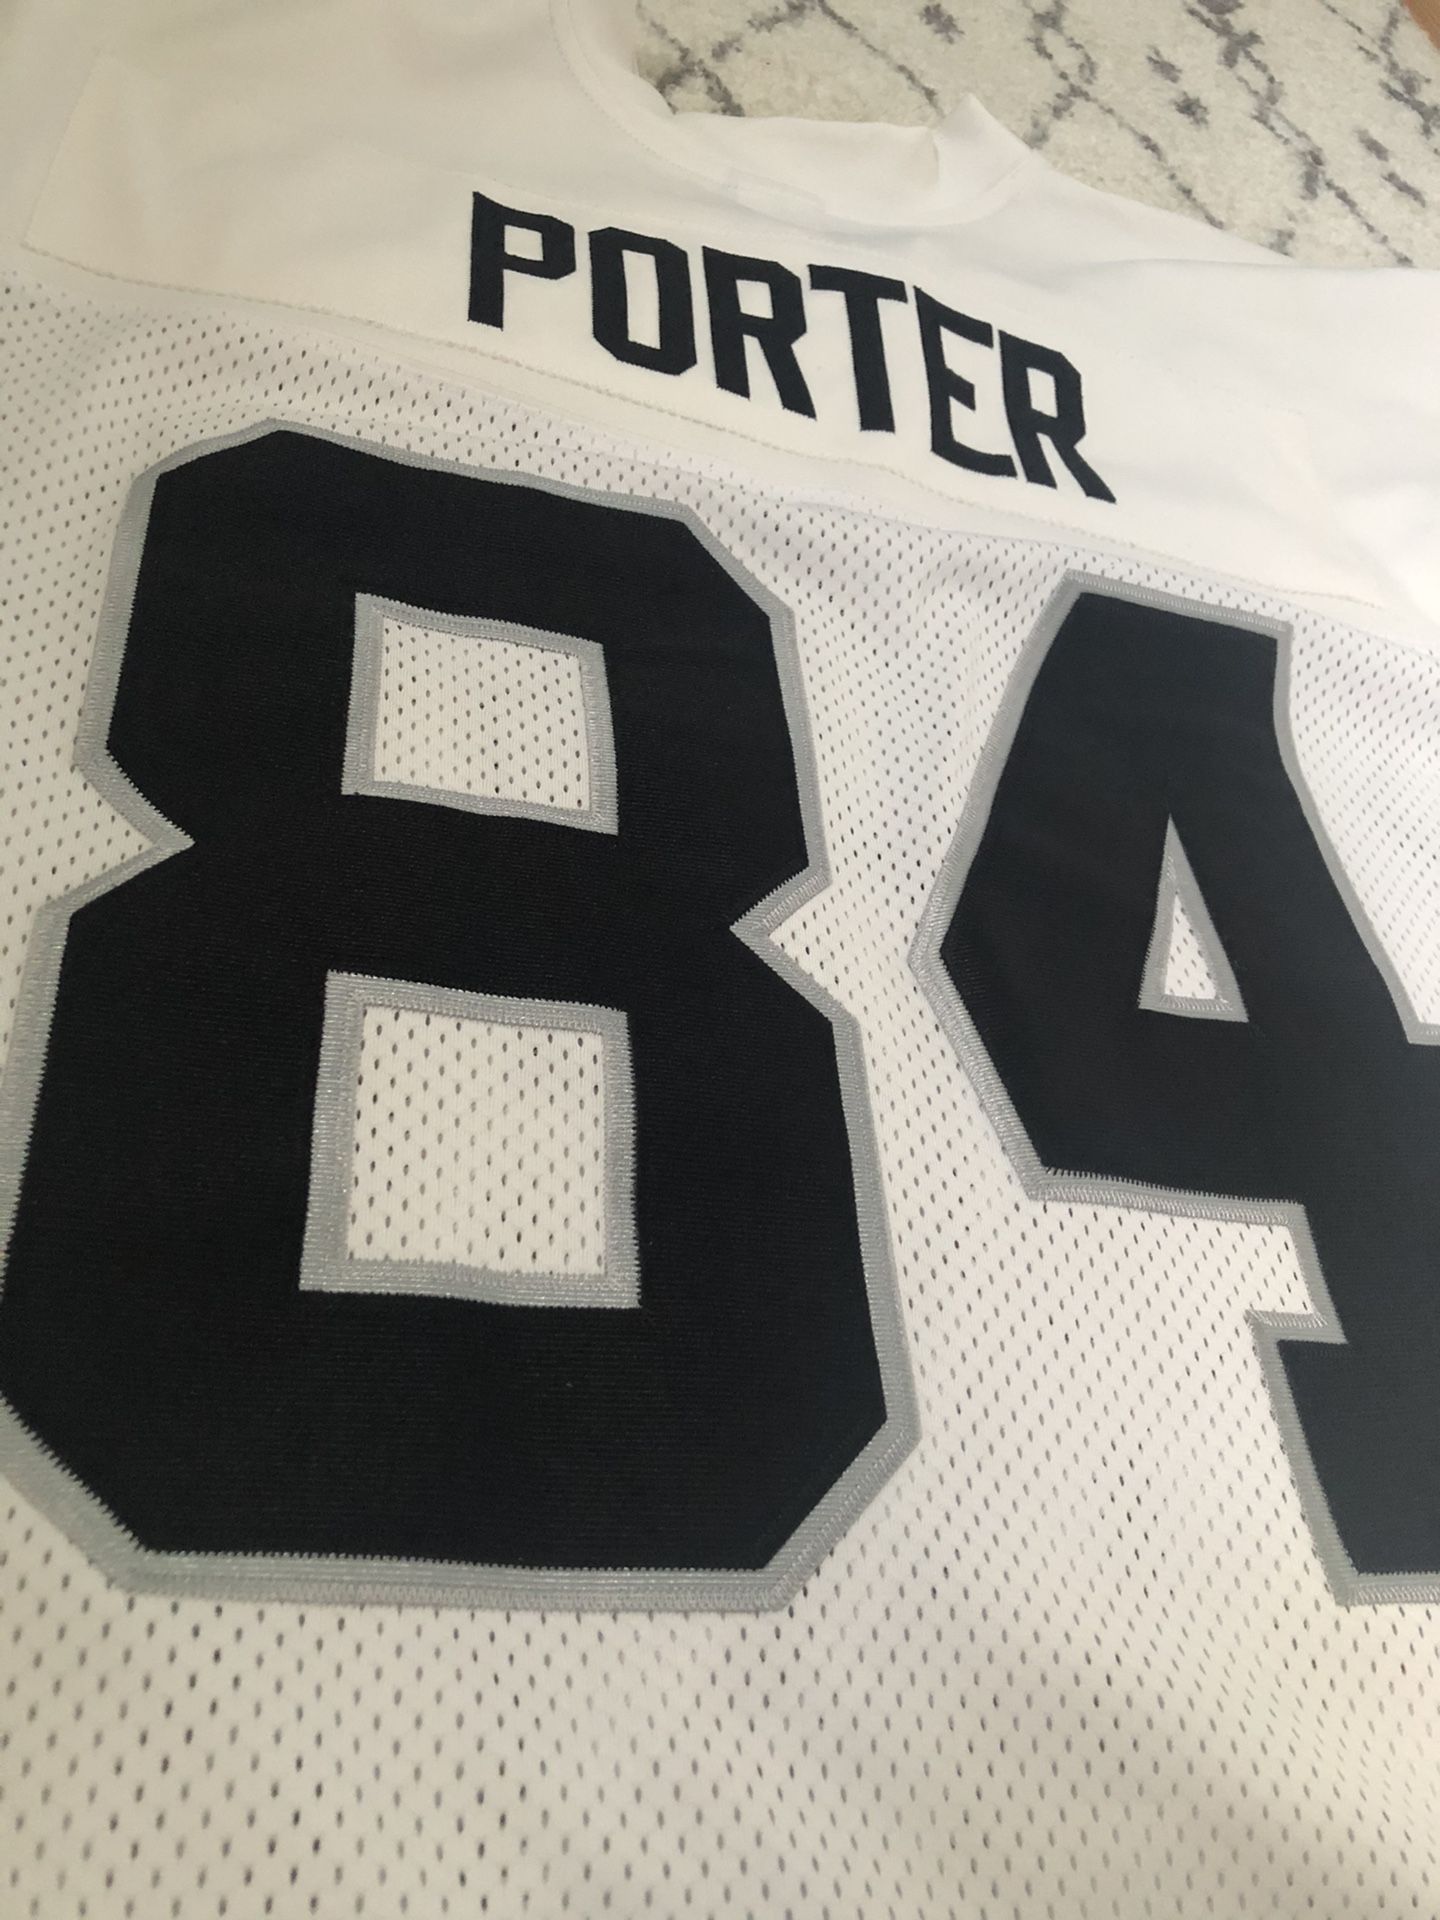 Raiders Jersey Full Authentic  Jerry Porter 